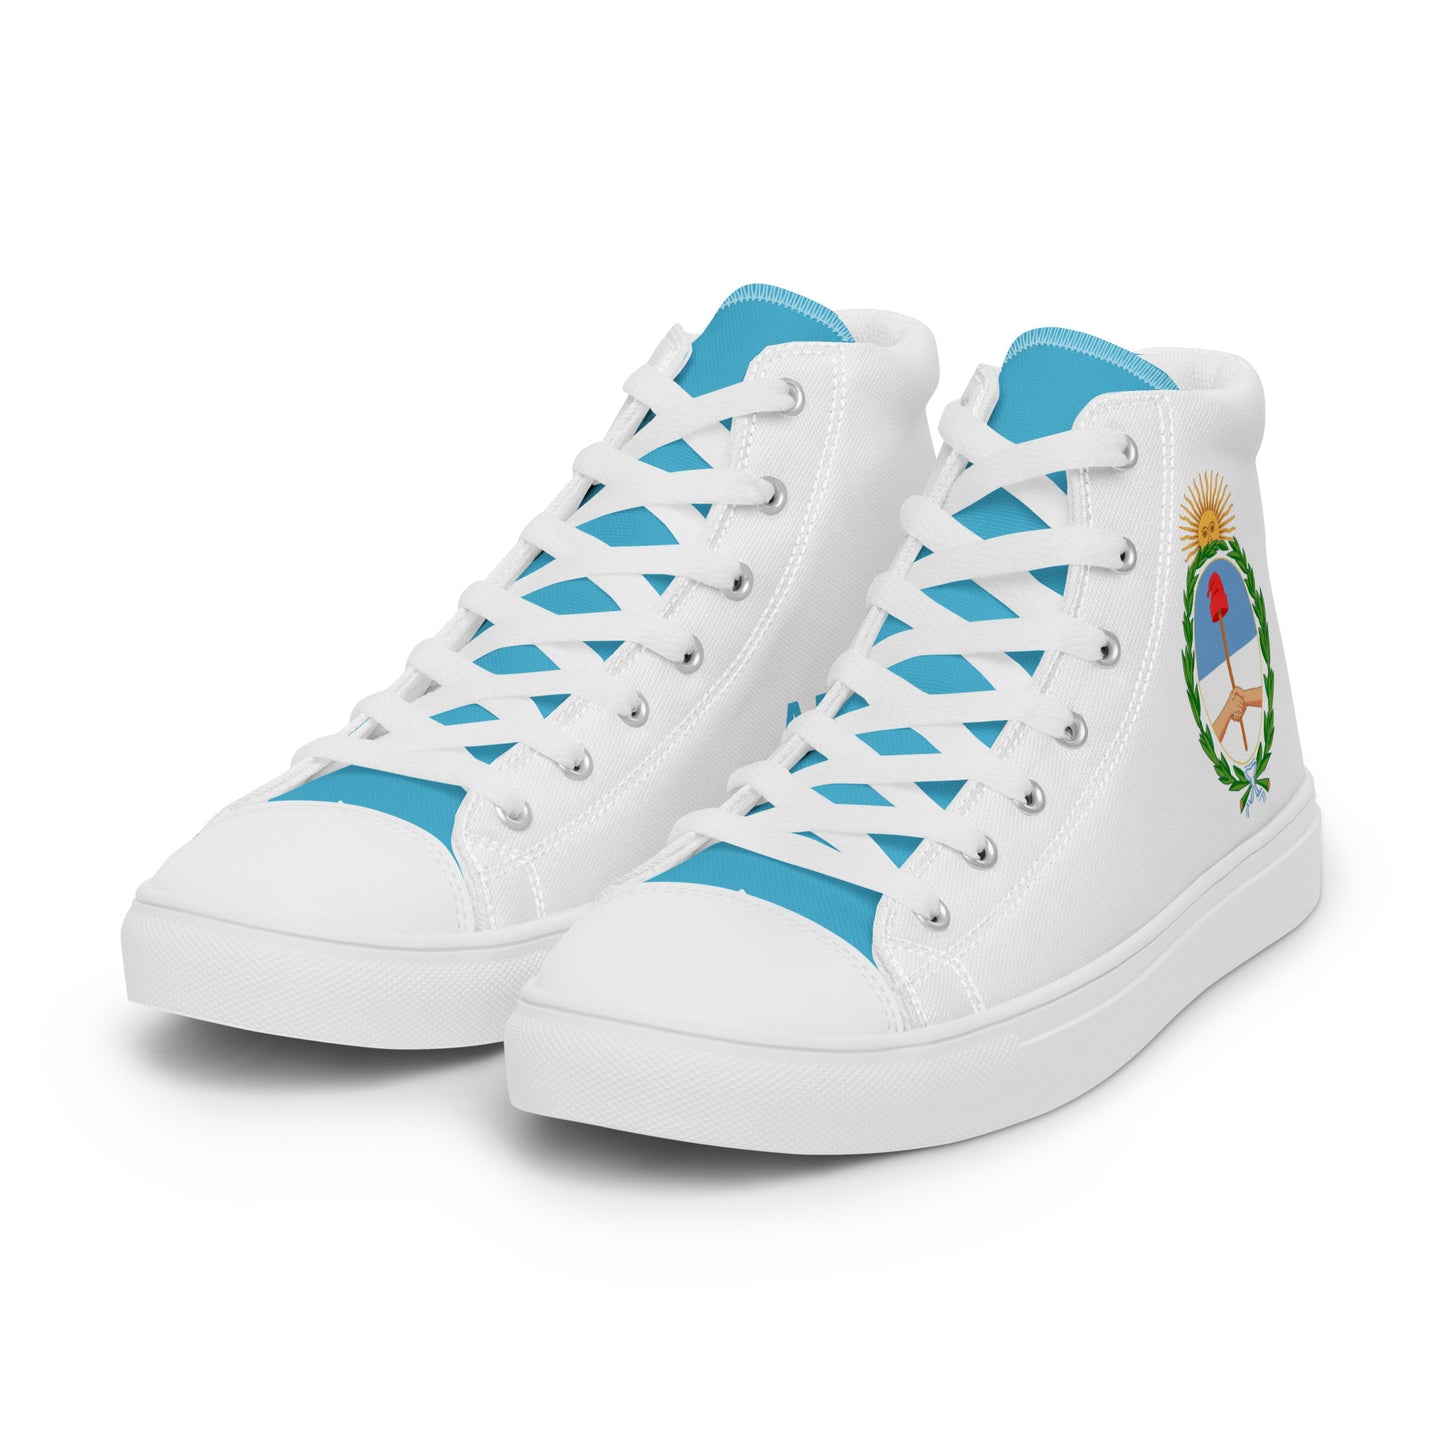 Argentina - Women - White - High top shoes